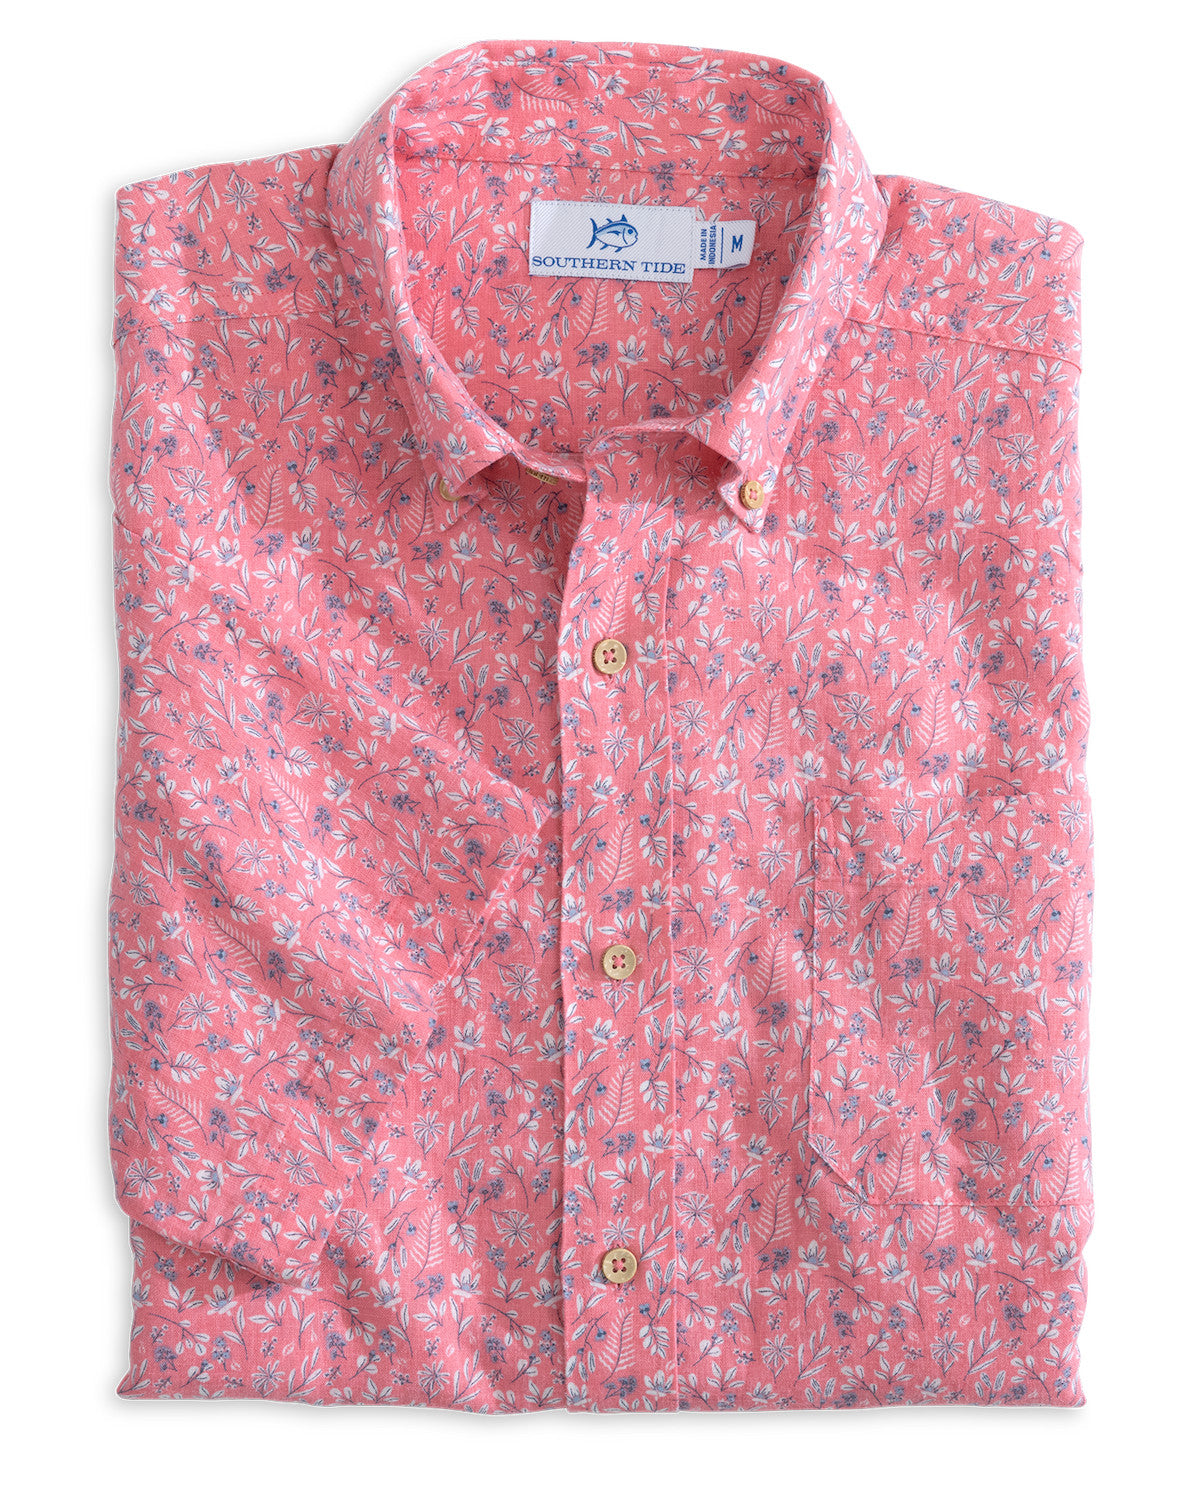 Linen Rayon Ditzy Floral Shirt in Geranium Pink